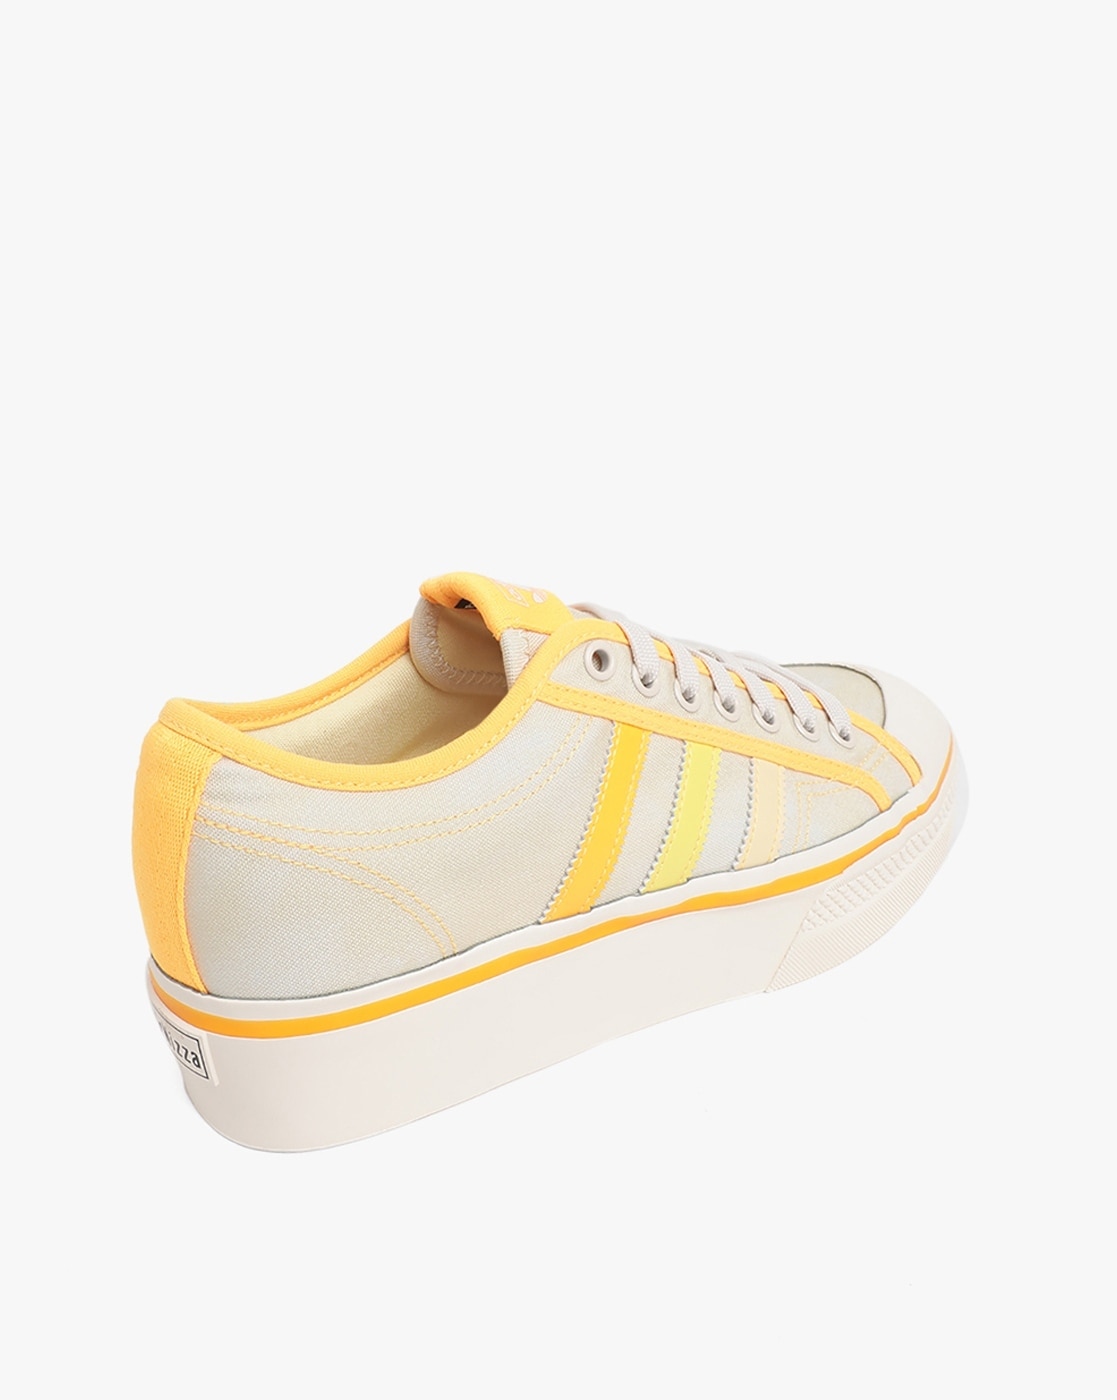 How to wear skirts with sneakers: yellow adidas Supercolors | Yellow adidas,  Adidas outfit shoes, Adidas shoes women